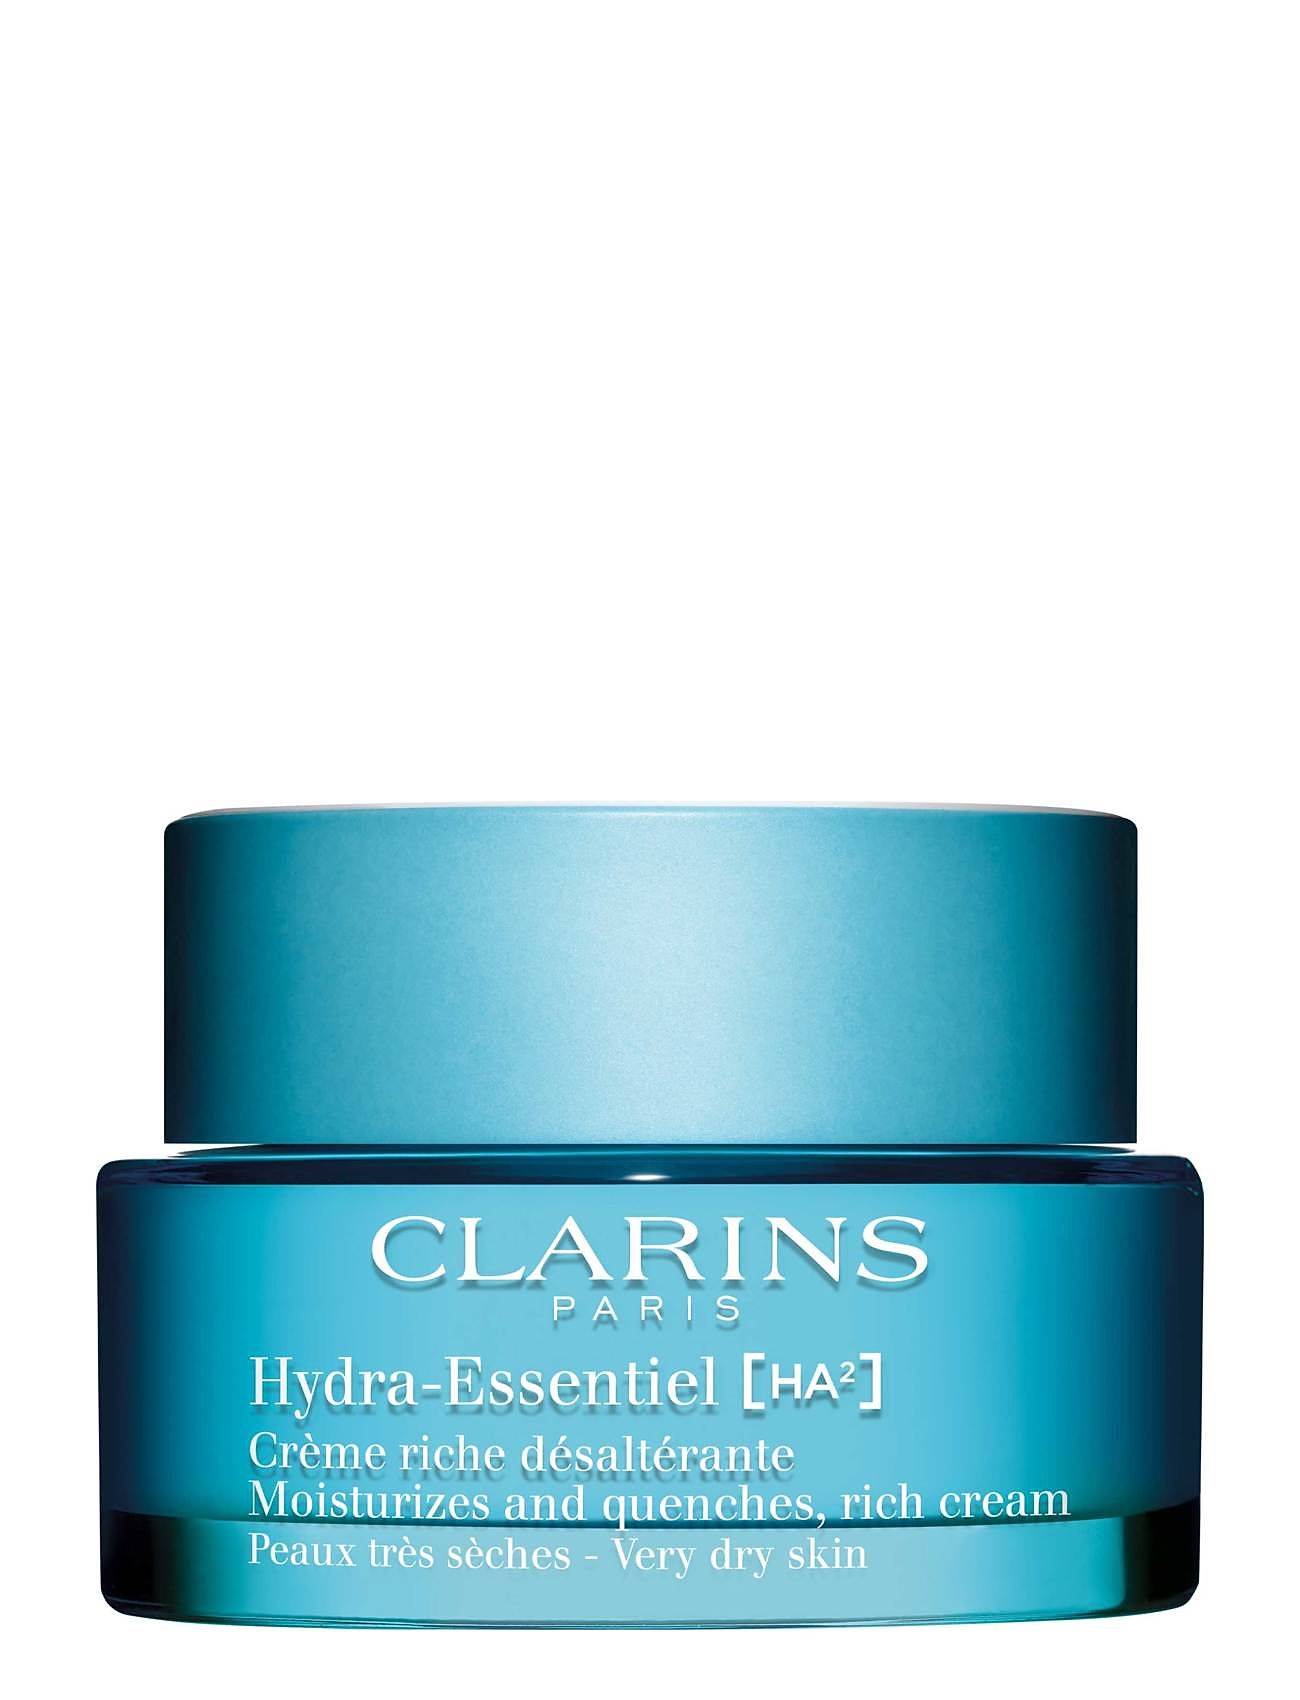 Hydra-Essentiel Moisturizes And Quenches, Rich Cream Very Dry Skin Beauty Women Skin Care Face Moisturizers Night Cream Nude Clarins